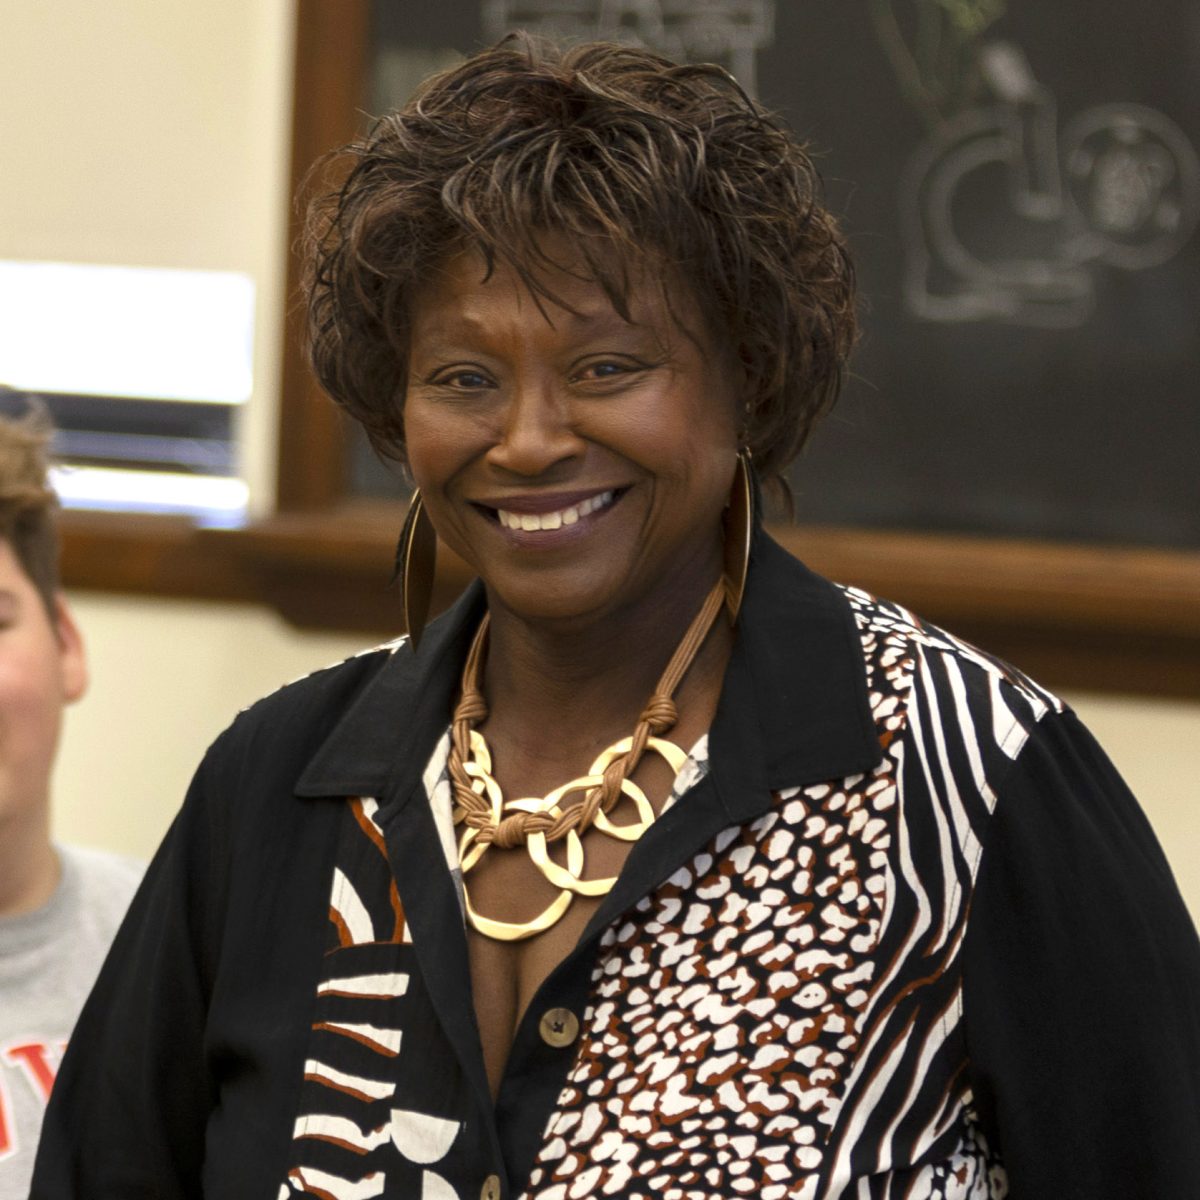 Dr. Saundra Ardrey is a professor at Western Kentucky University. Her focus is political science, with an emphasis on women in politics. Dr. Ardrey is in her 35th year at WKU.